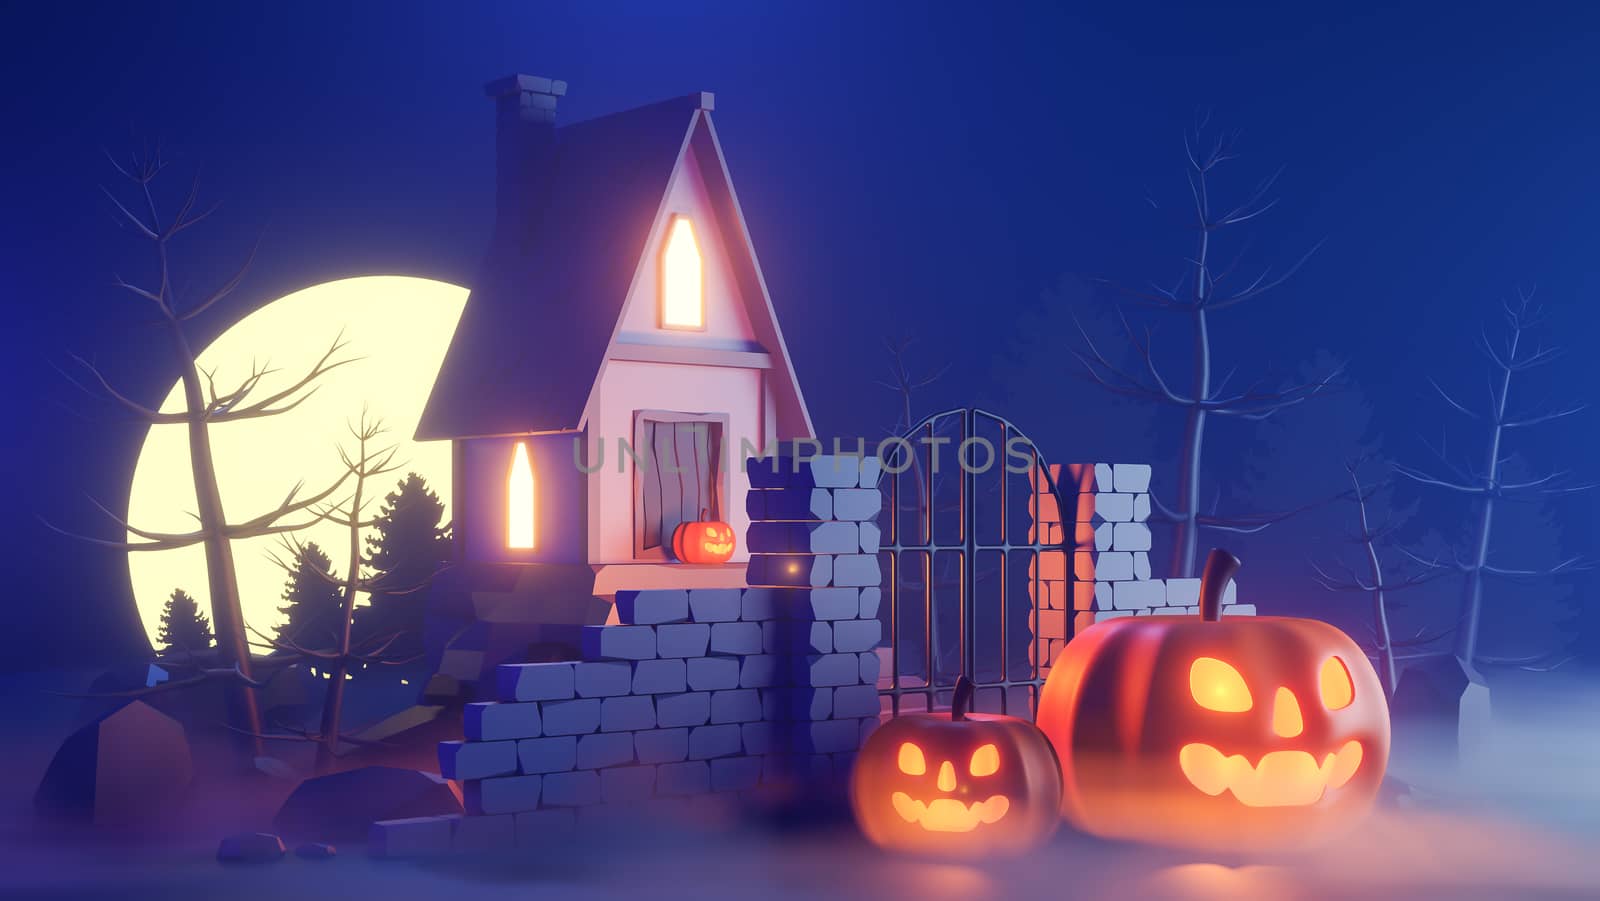 halloween theme with pumpkins and a house at night.,3d model and illustration. by anotestocker